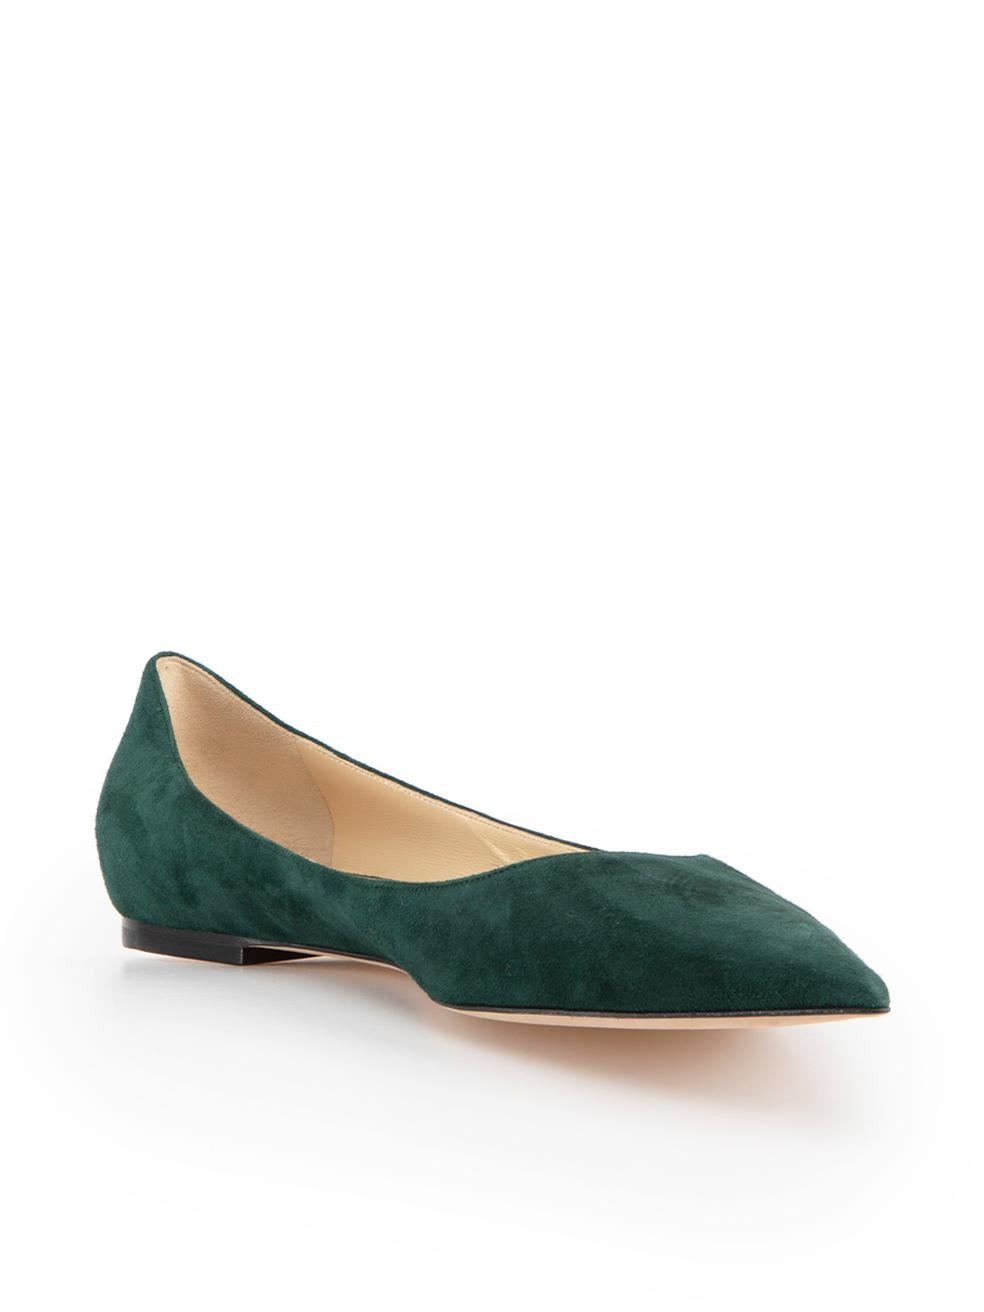 CONDITION is Very good. Hardly any visible wear to flats is evident on this used Jimmy Choo designer resale item.
 
 Details
 Green
 Suede
 Flats
 Point toe
 Slip on
 
 
 Made in Italy
 
 Composition
 EXTERIOR: Suede
 INTERIOR: Leather
 
 Size &